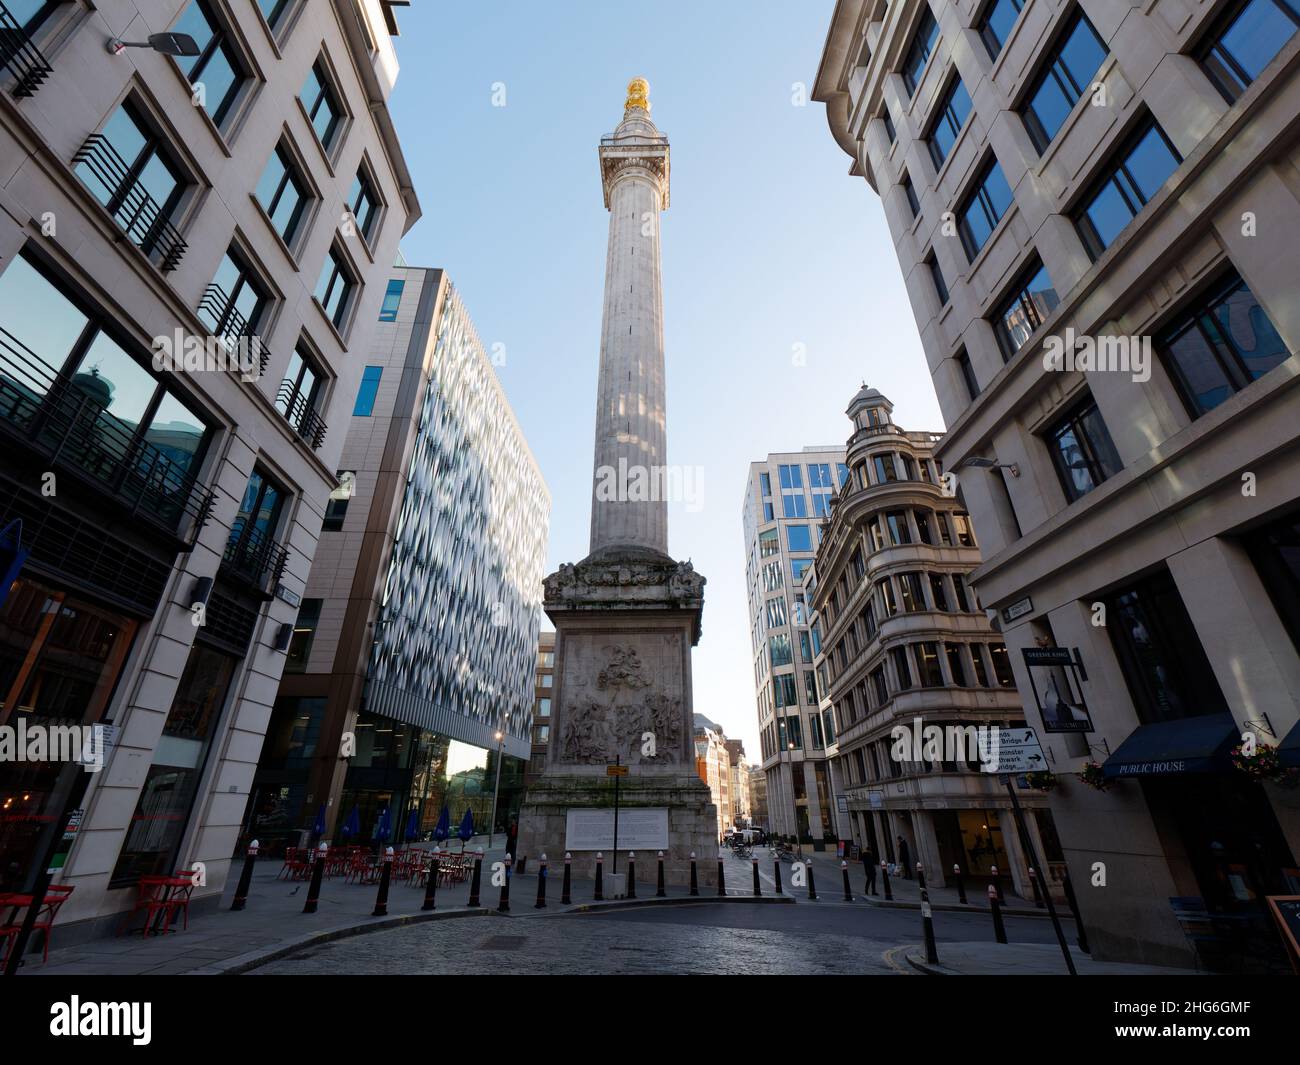 London, Greater London, England, January 5th 2022: The Monument, a famous column and tourist attraction built to commemorate the Great Fire of London. Stock Photo